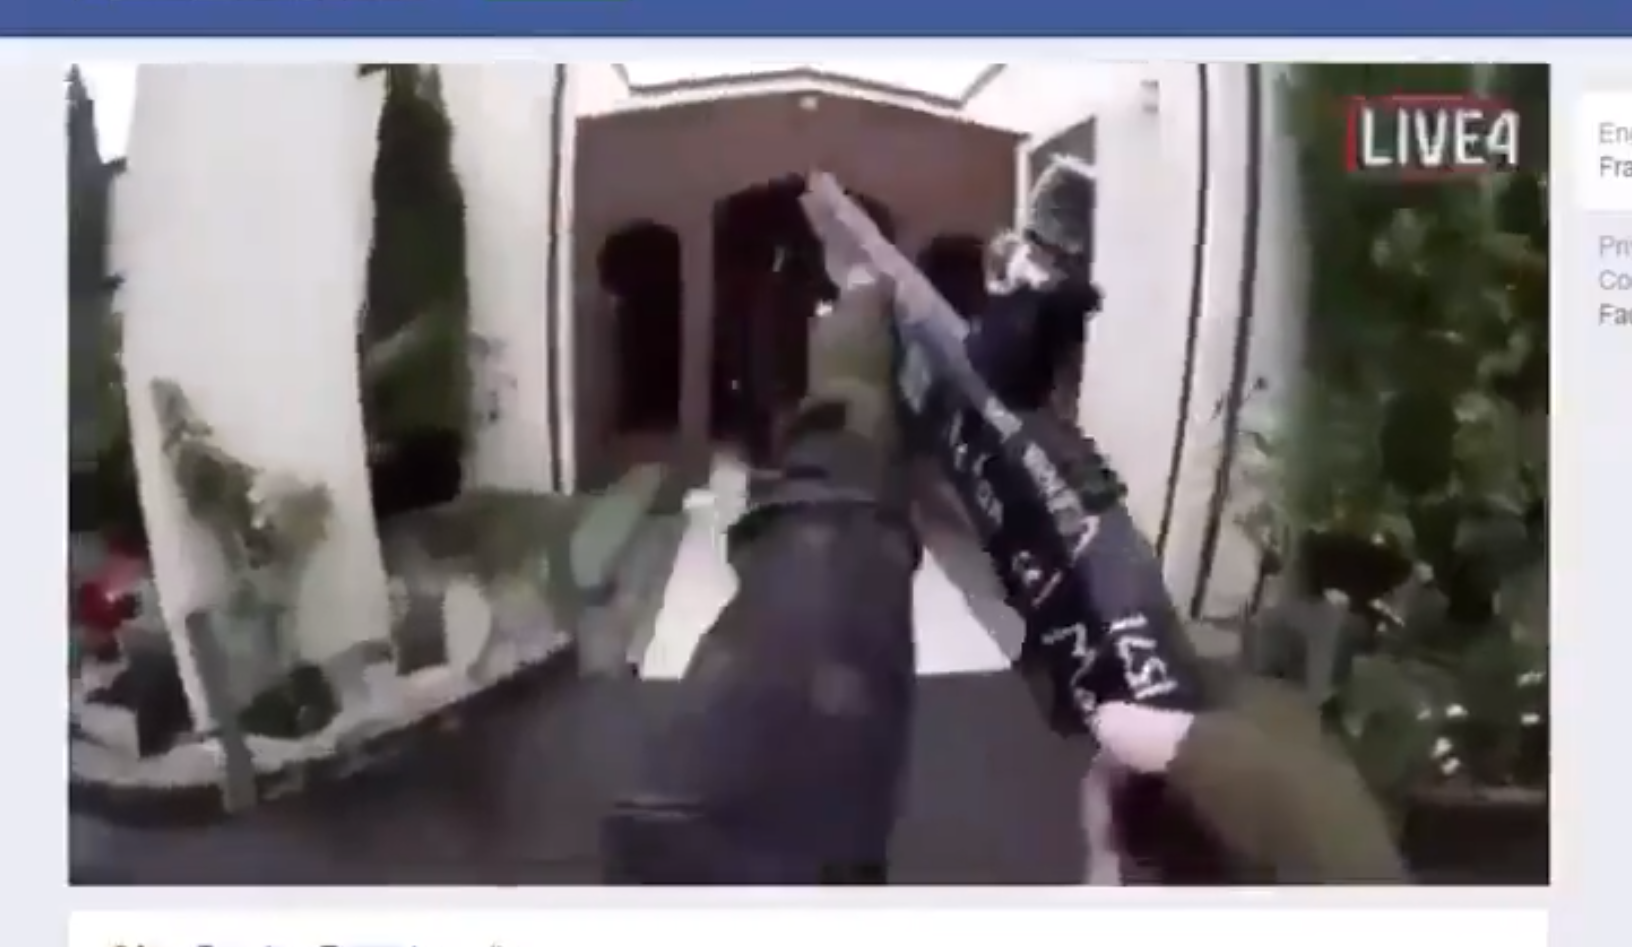 new zealand shooting livestream full video download